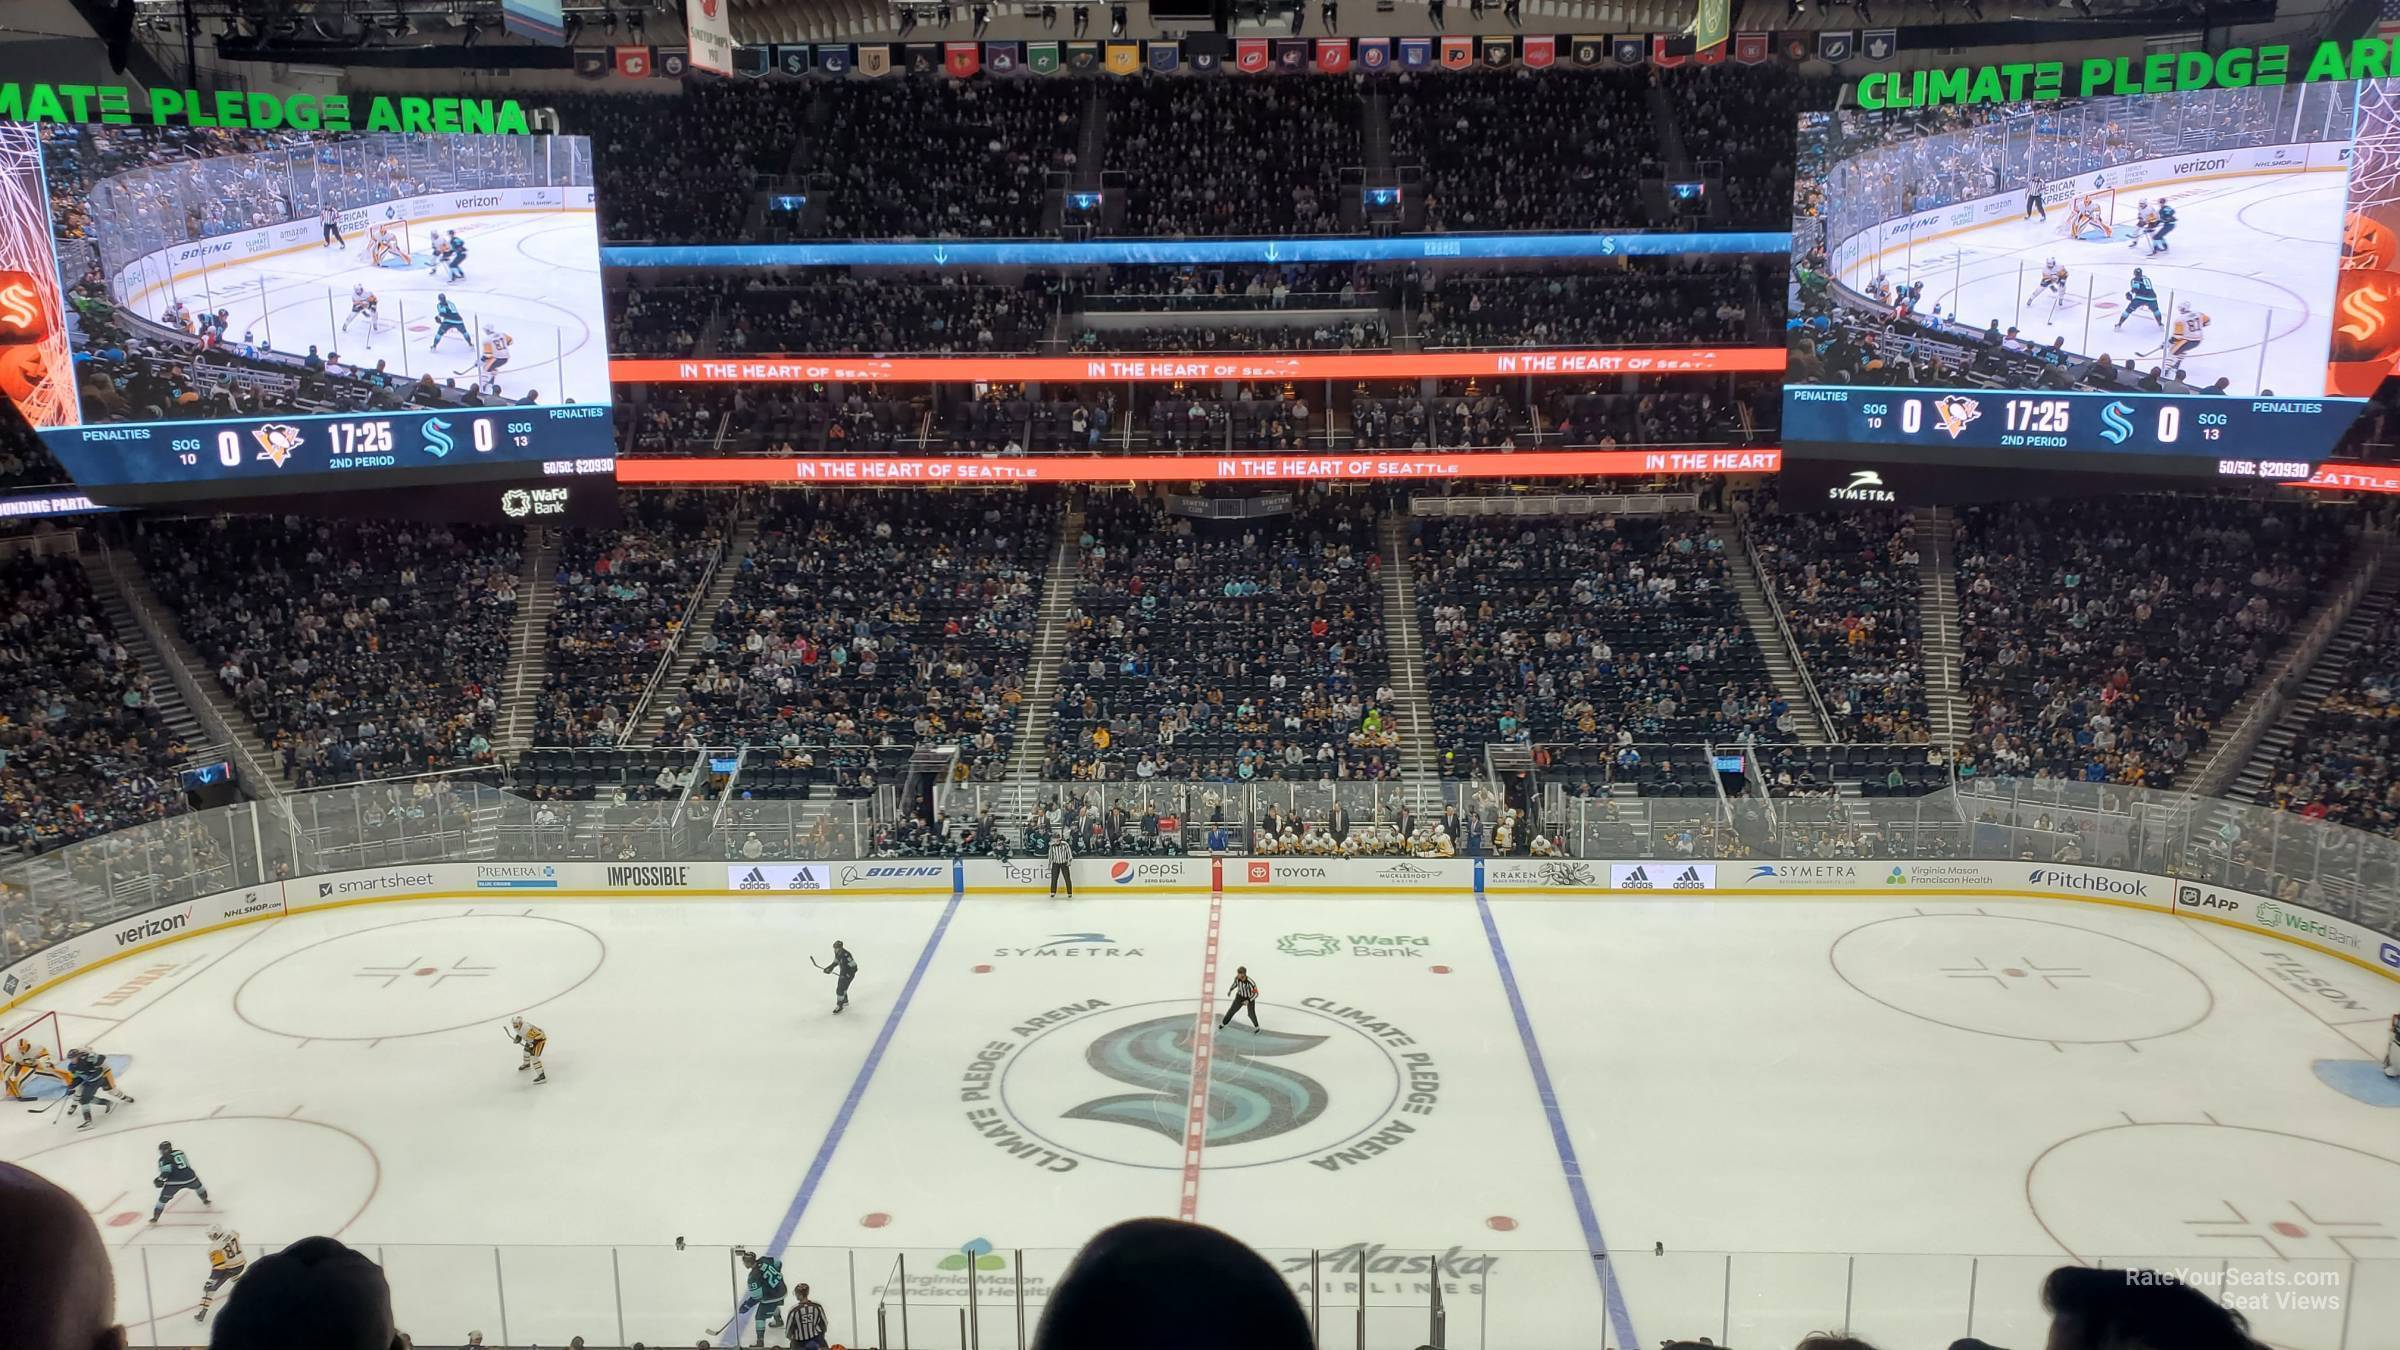 section 114, row bar seat view  for hockey - climate pledge arena